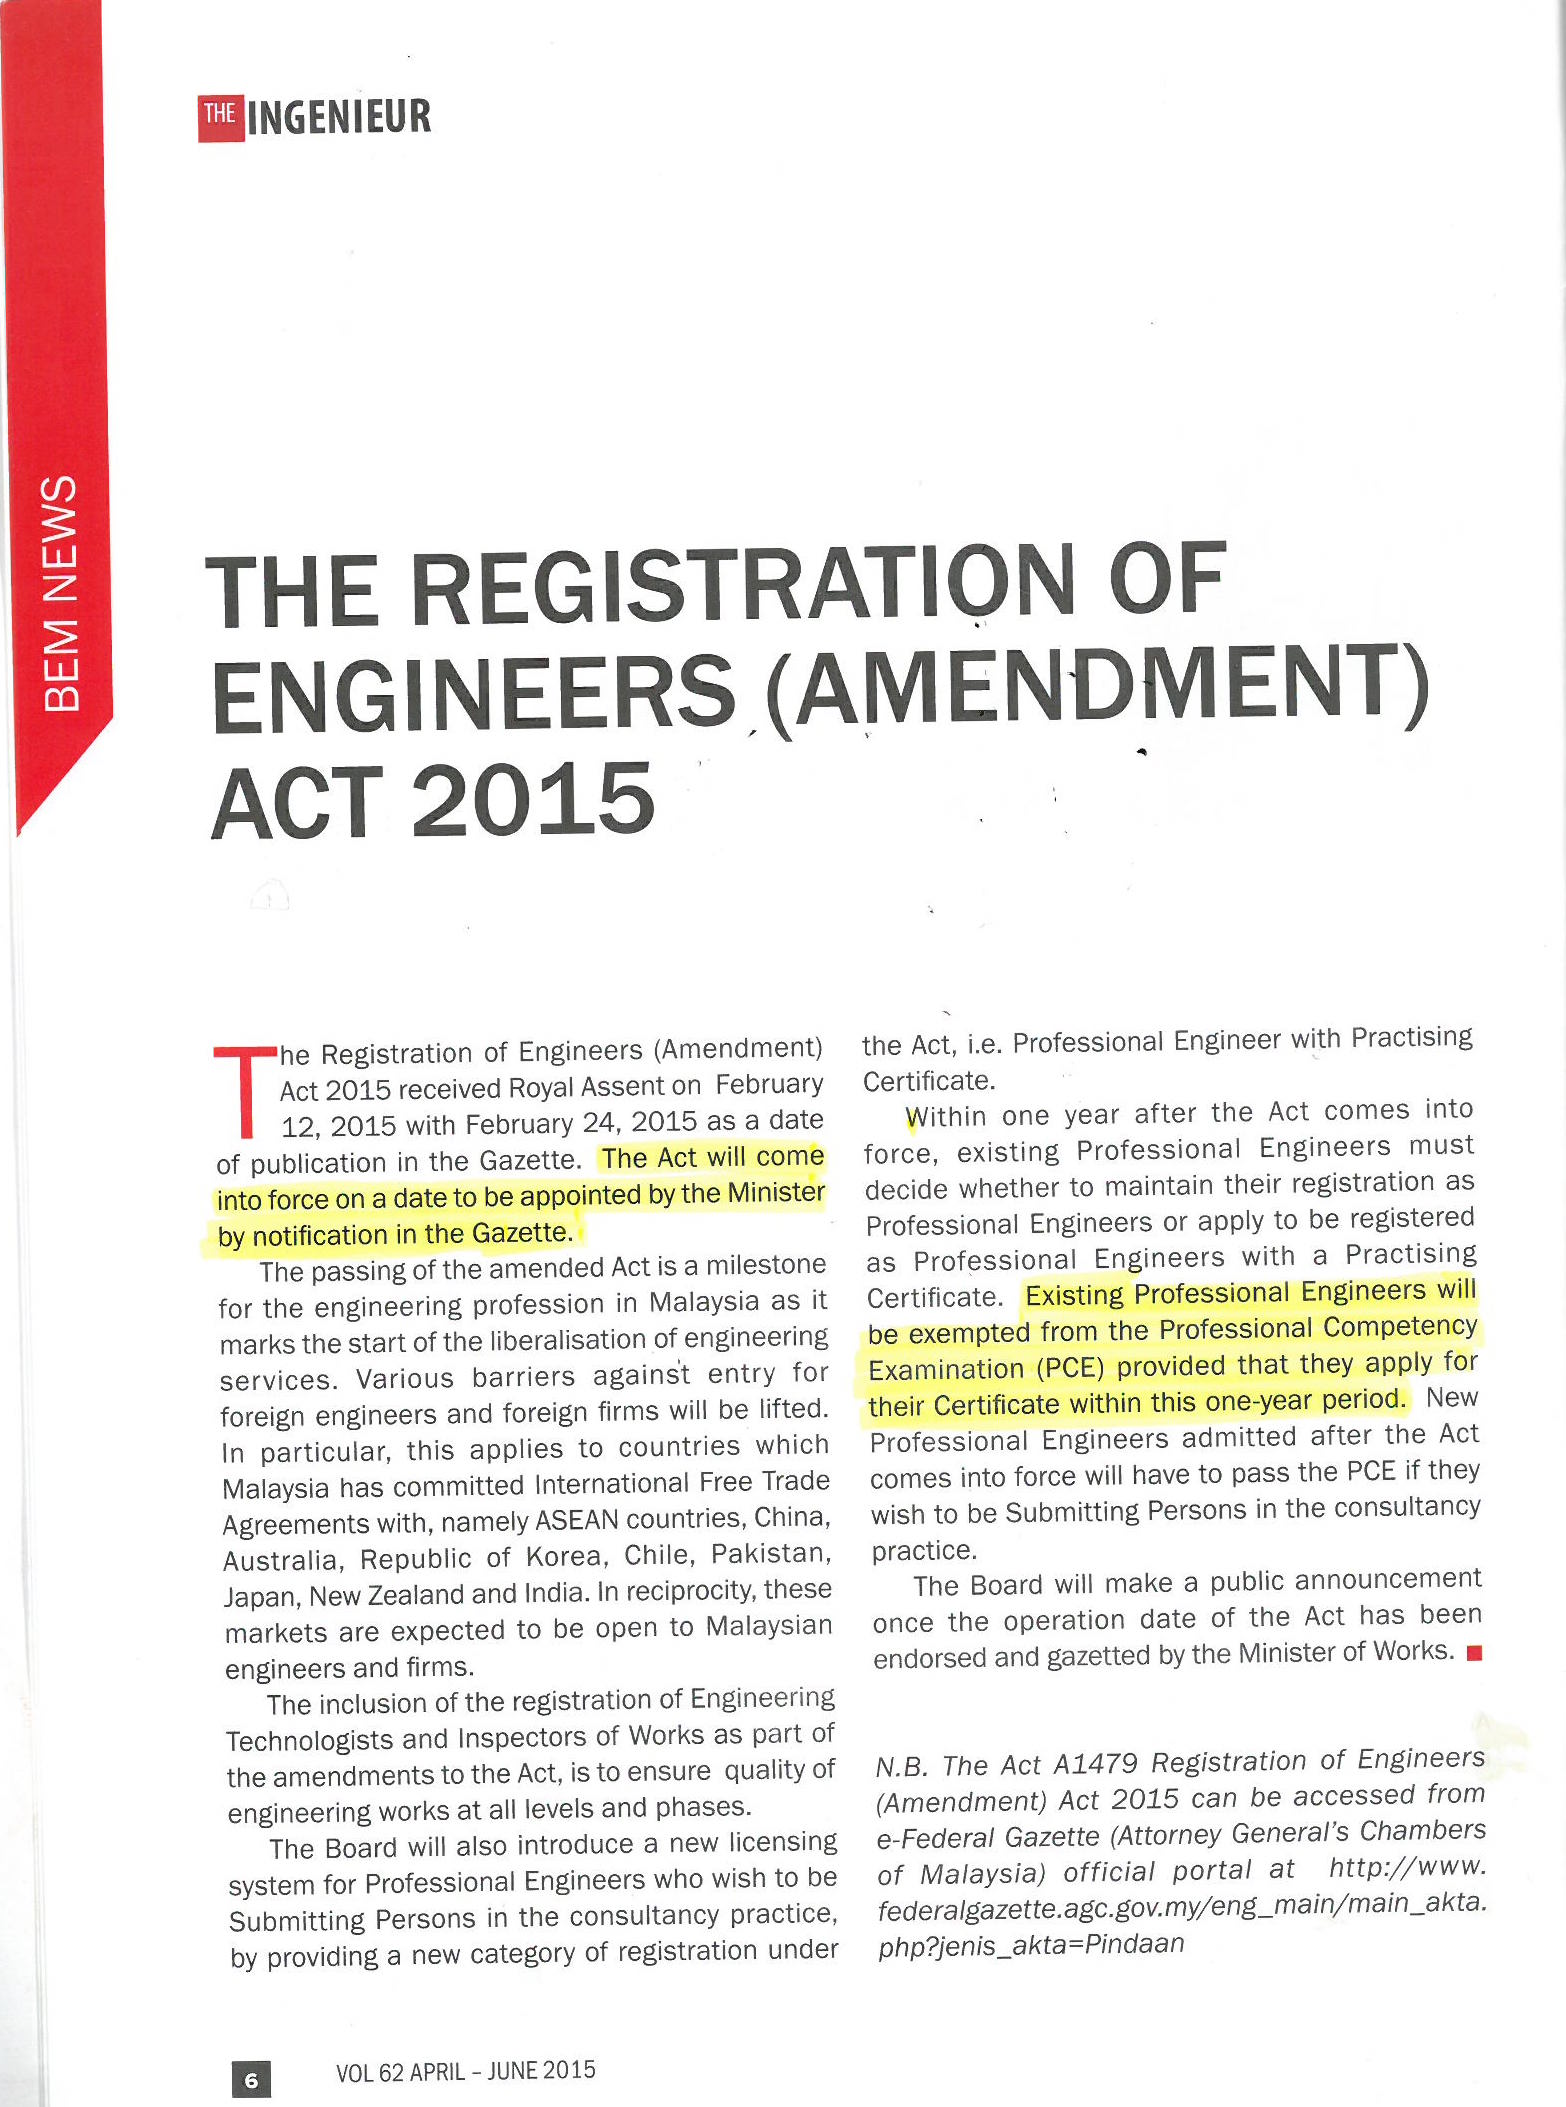 Registration of Engineers Act 2015